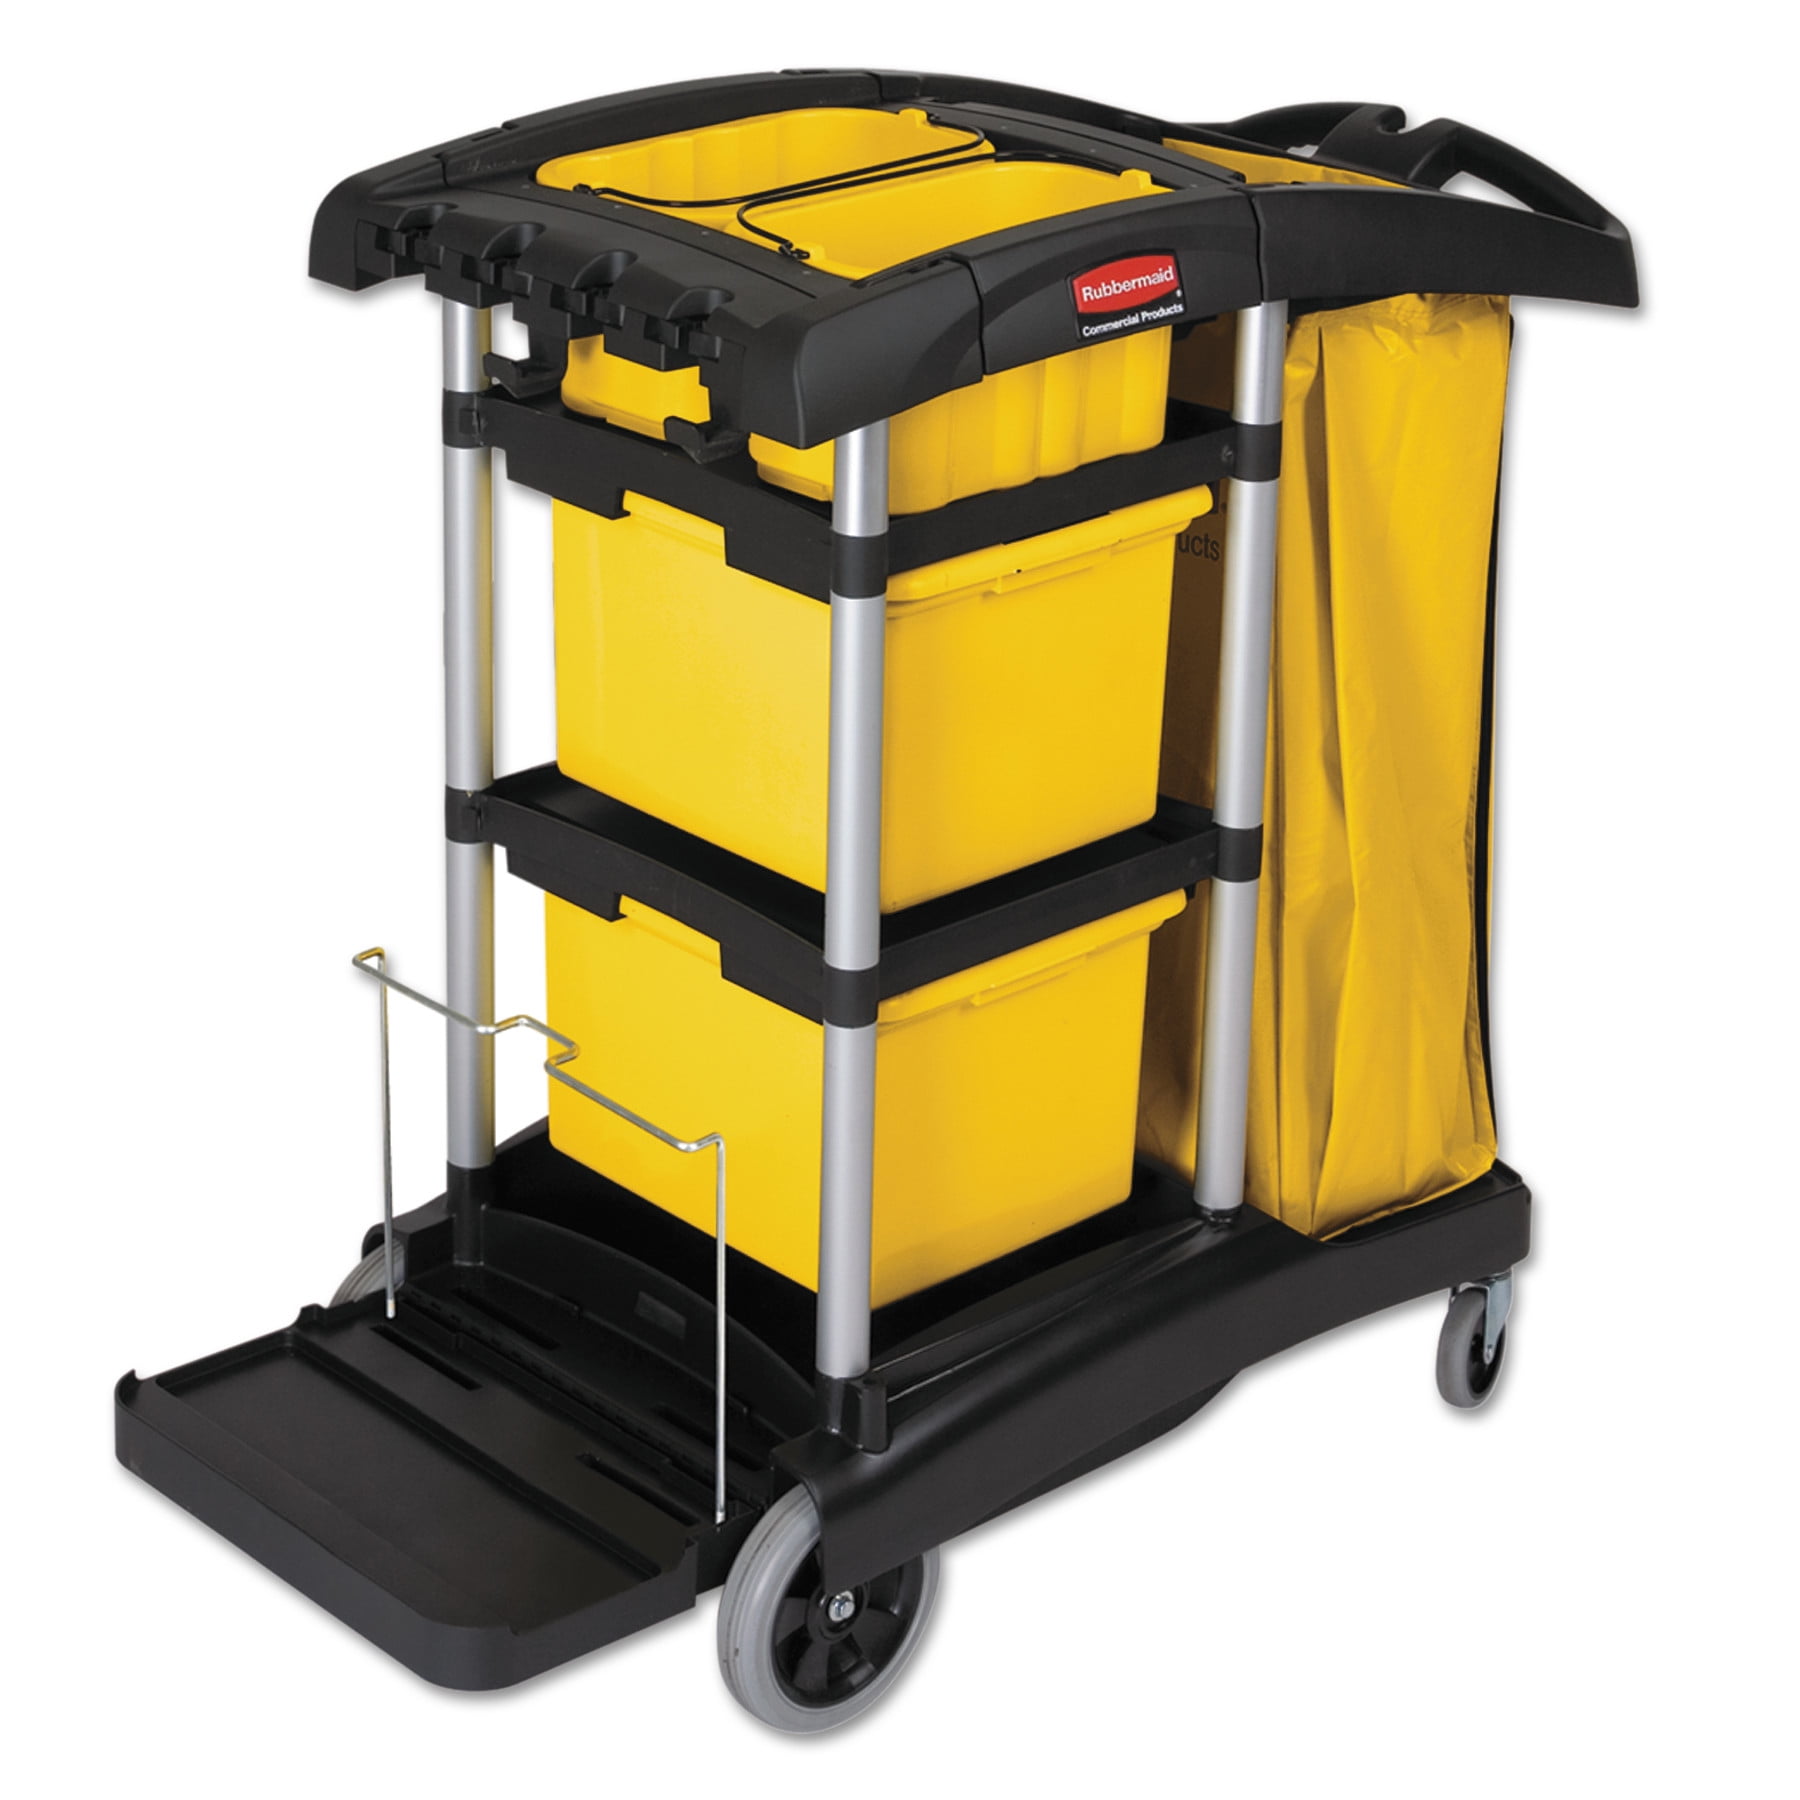 Rubbermaid Commercial Products - Commercial Cleaning Equipment & Supplies  Catalog, New York